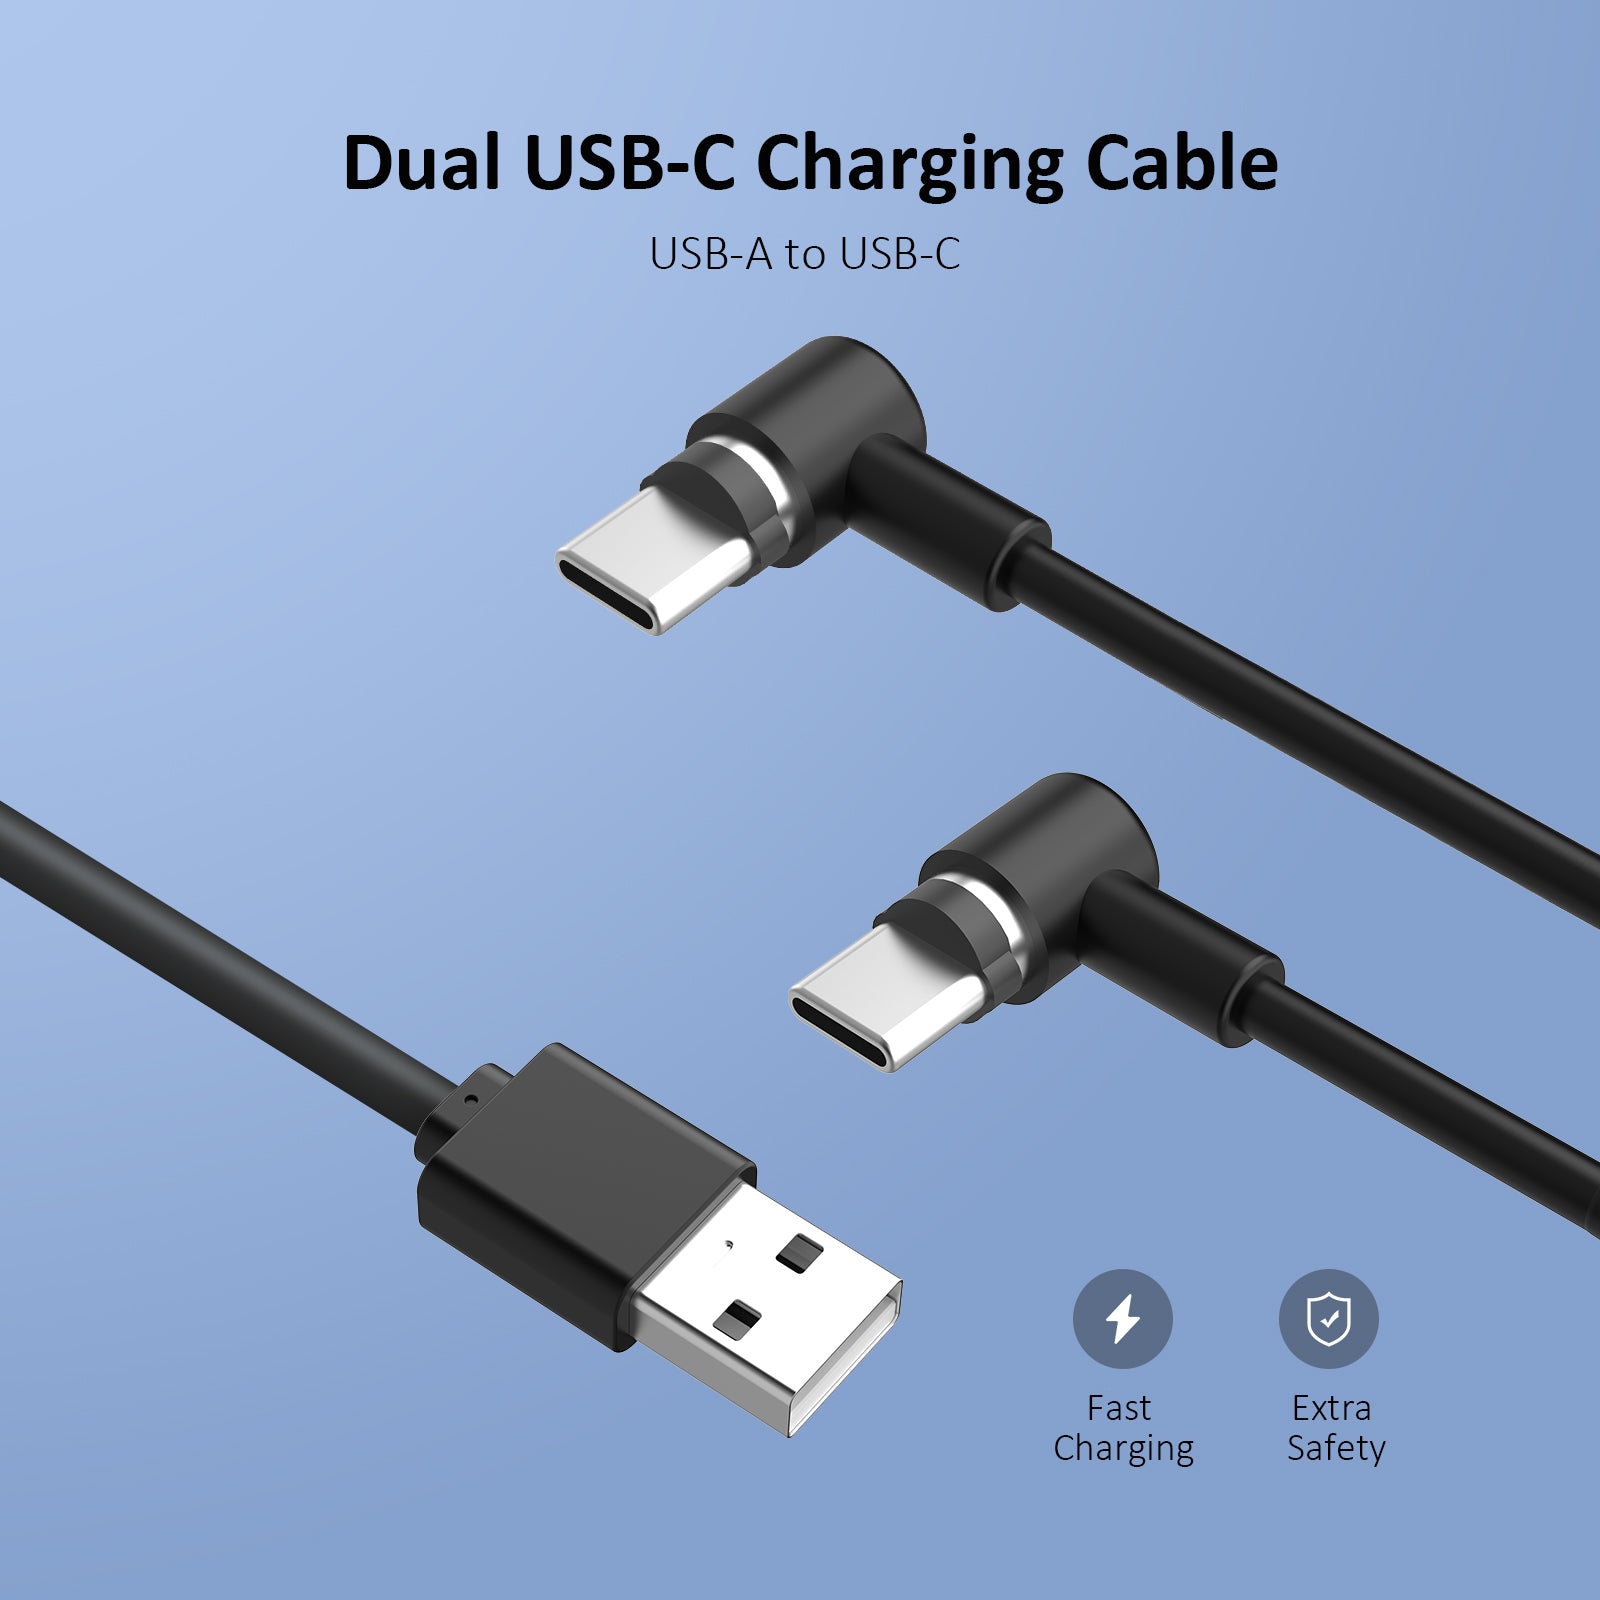 The 90° Dual USB-C Charging Cable is a fast-charging data cable with dual heads, allowing you to conveniently charge multiple devices simultaneously.